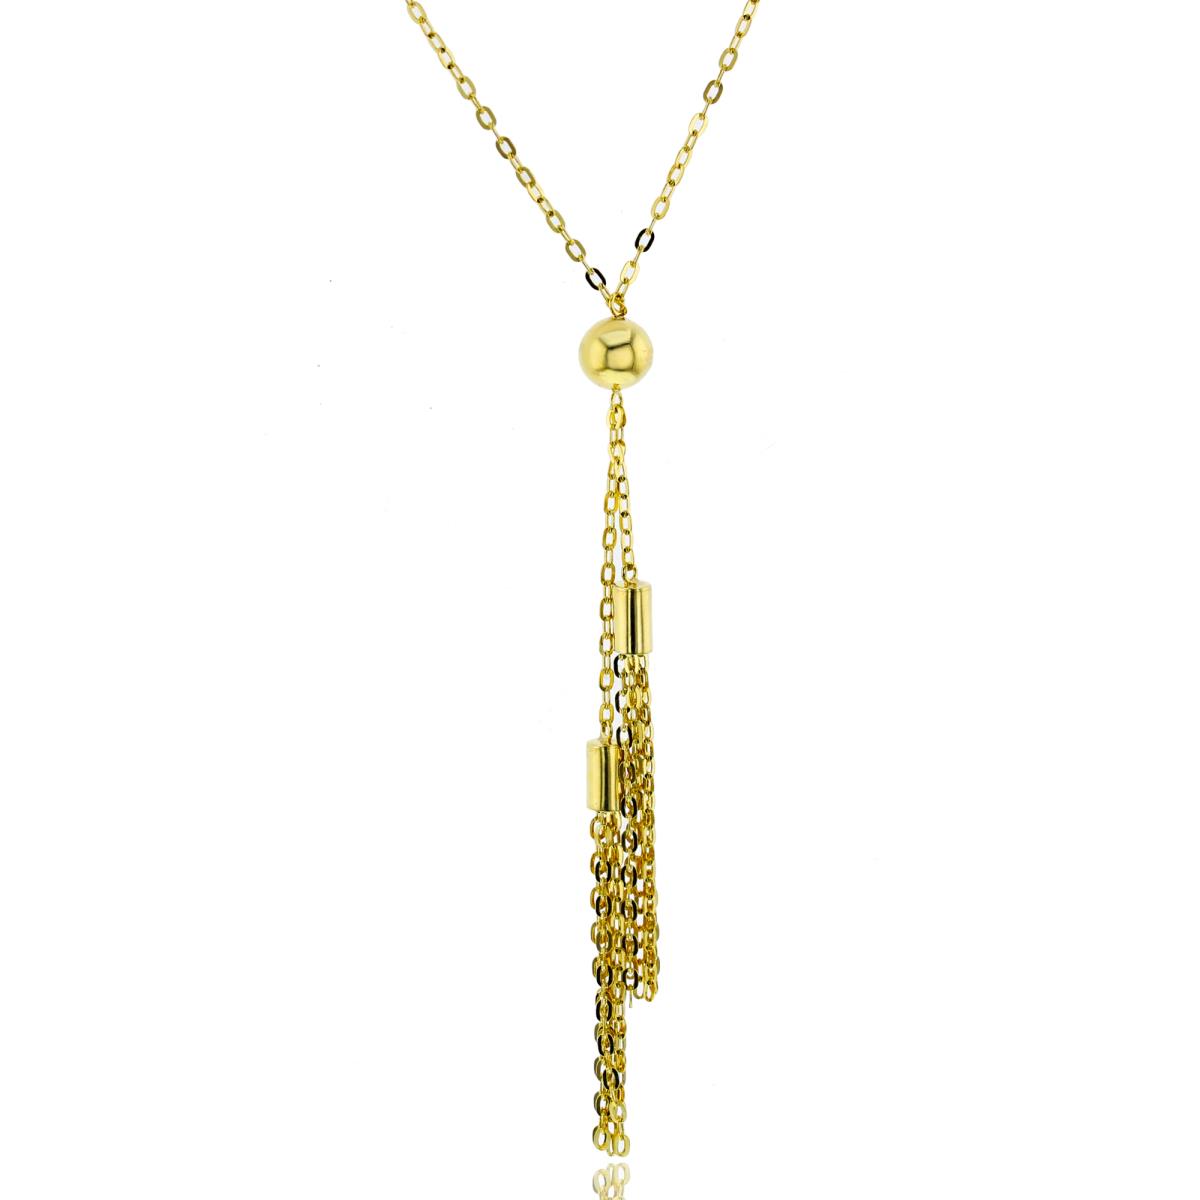 14K Yellow Gold 2 Five-Strand Tassels 17" Chain Necklace